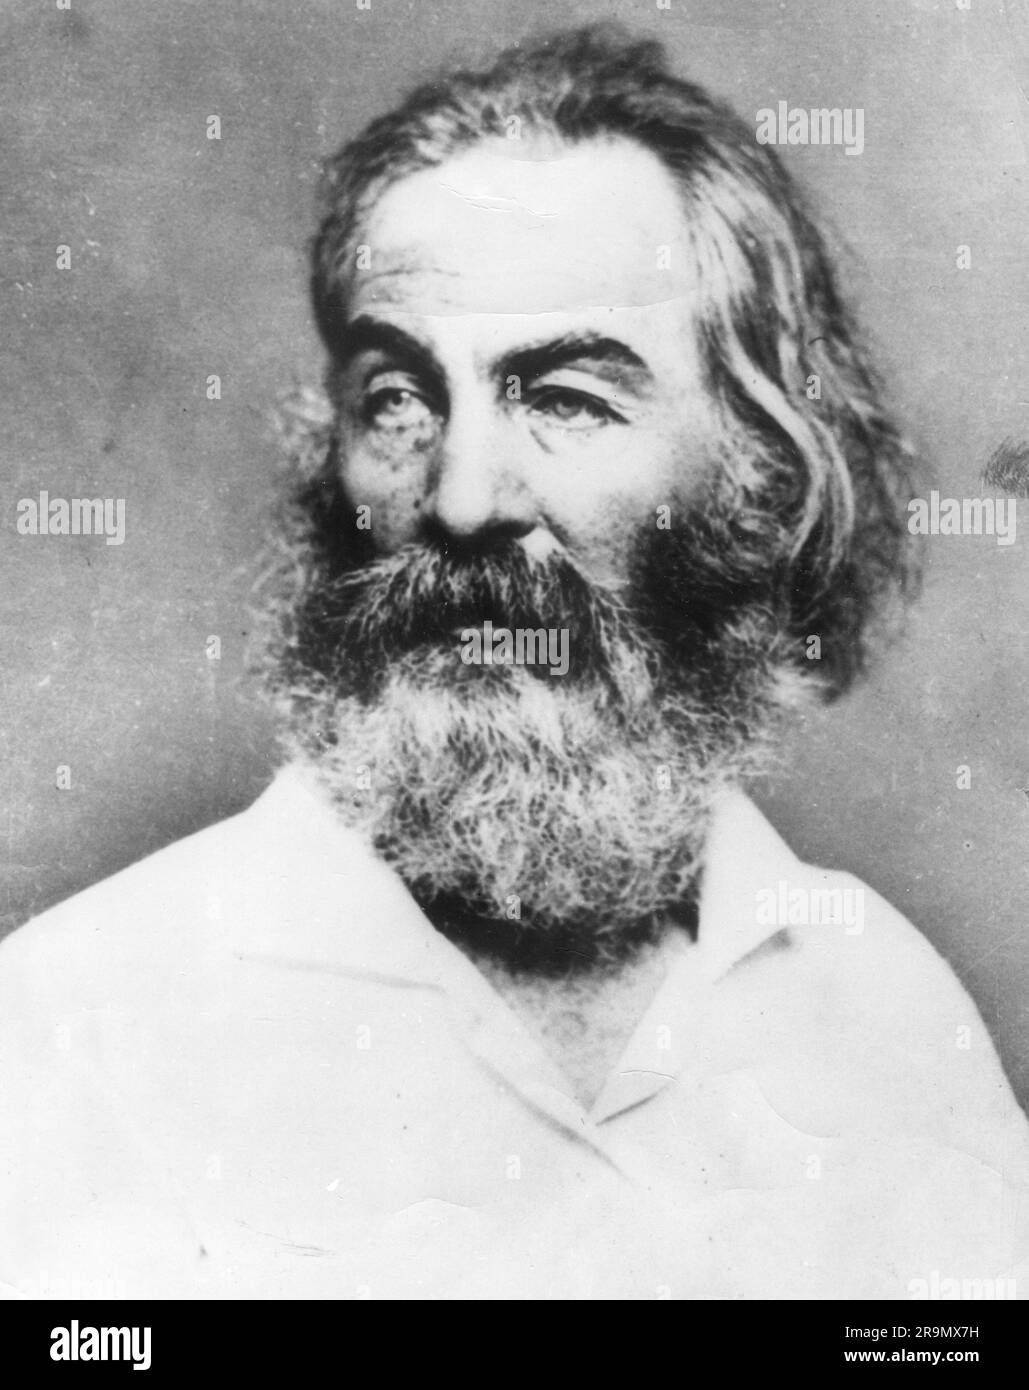 Whitman, Walt, 31.5.1819 - 26.3.1892, American writer, photograph by Mathew Brady, Washington D.C., ADDITIONAL-RIGHTS-CLEARANCE-INFO-NOT-AVAILABLE Stock Photo